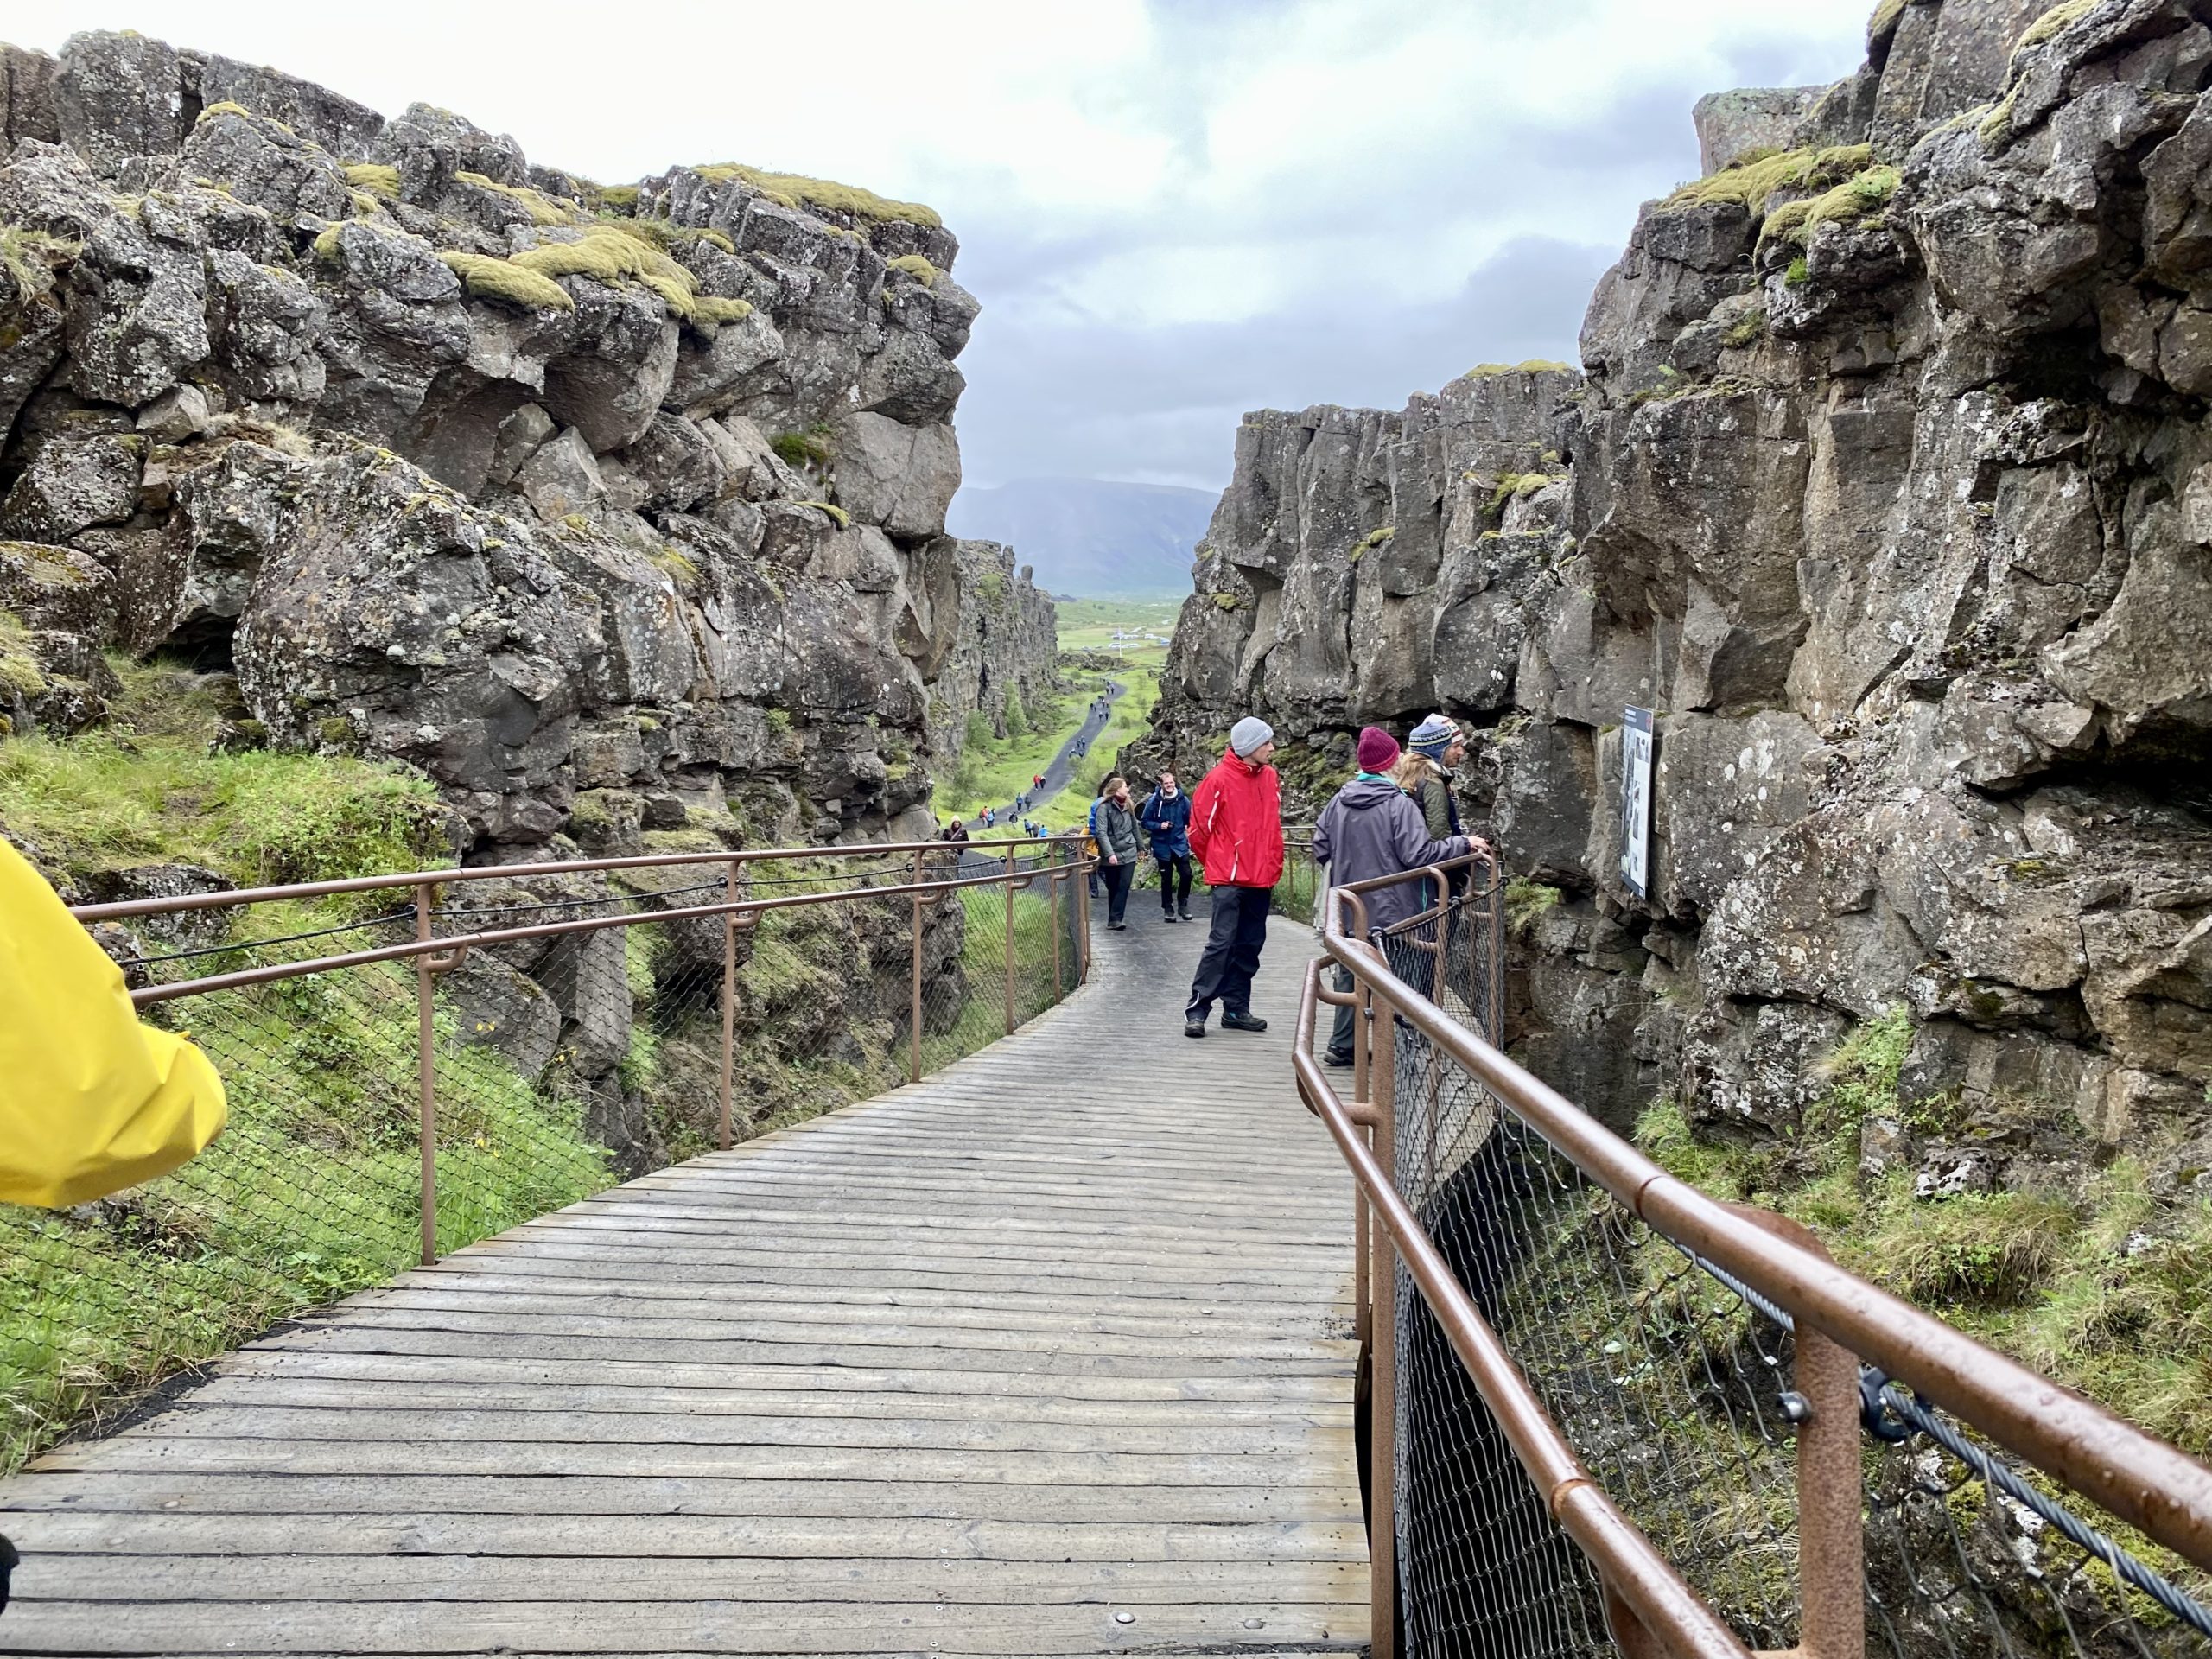 a group of people walking on a wooden walkway